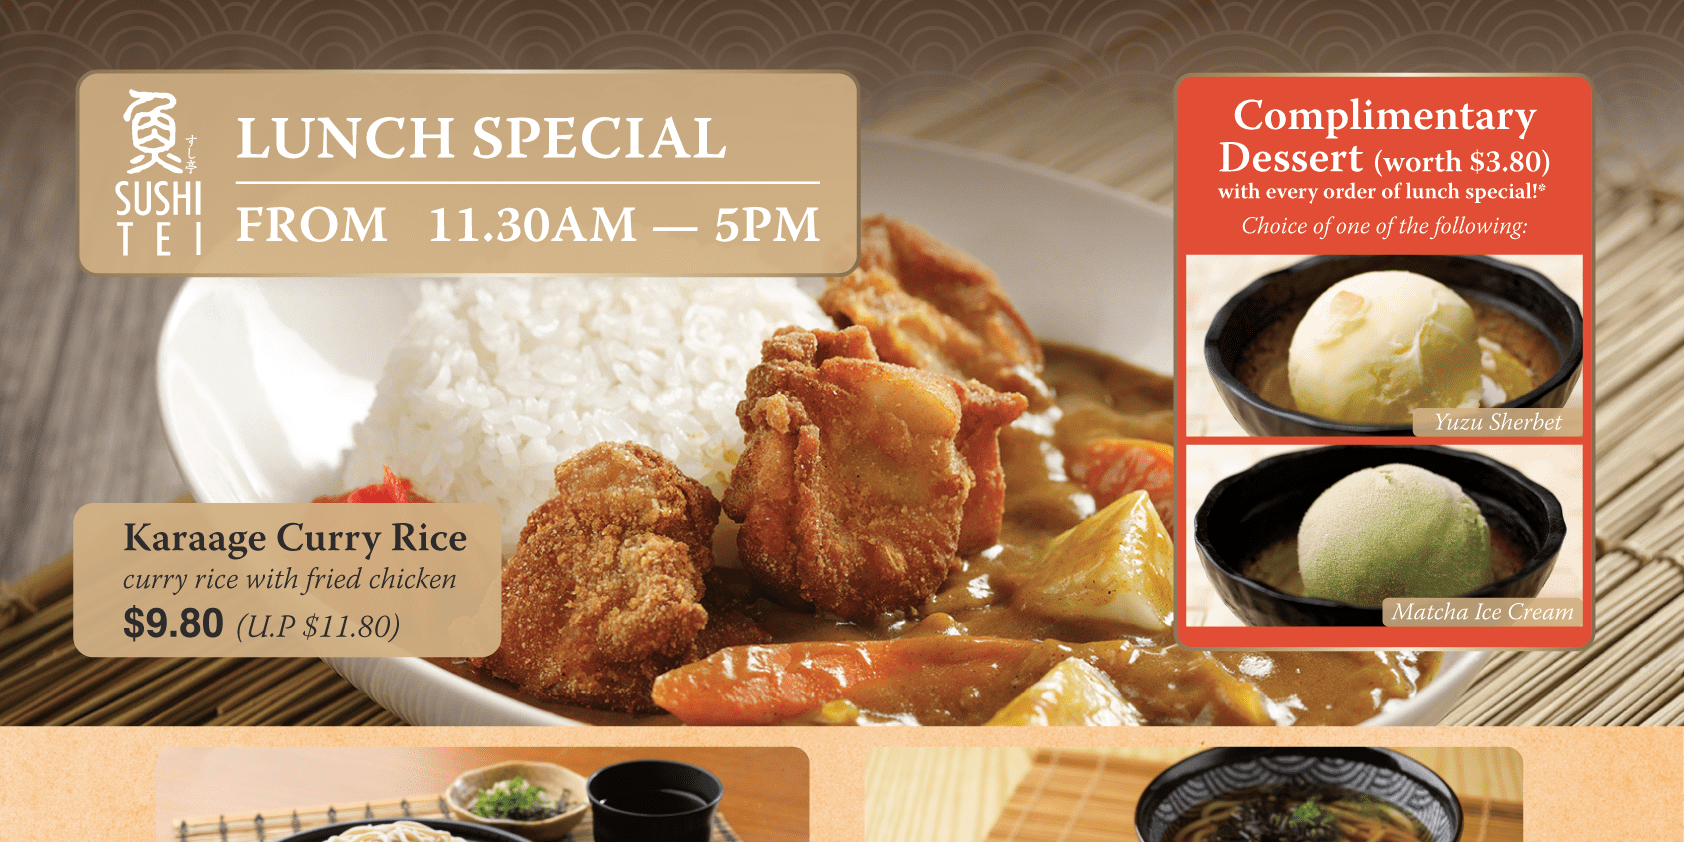 Sushi Tei lunch menu special with complimentary dessert at Changi Jewel’s Outlet!  